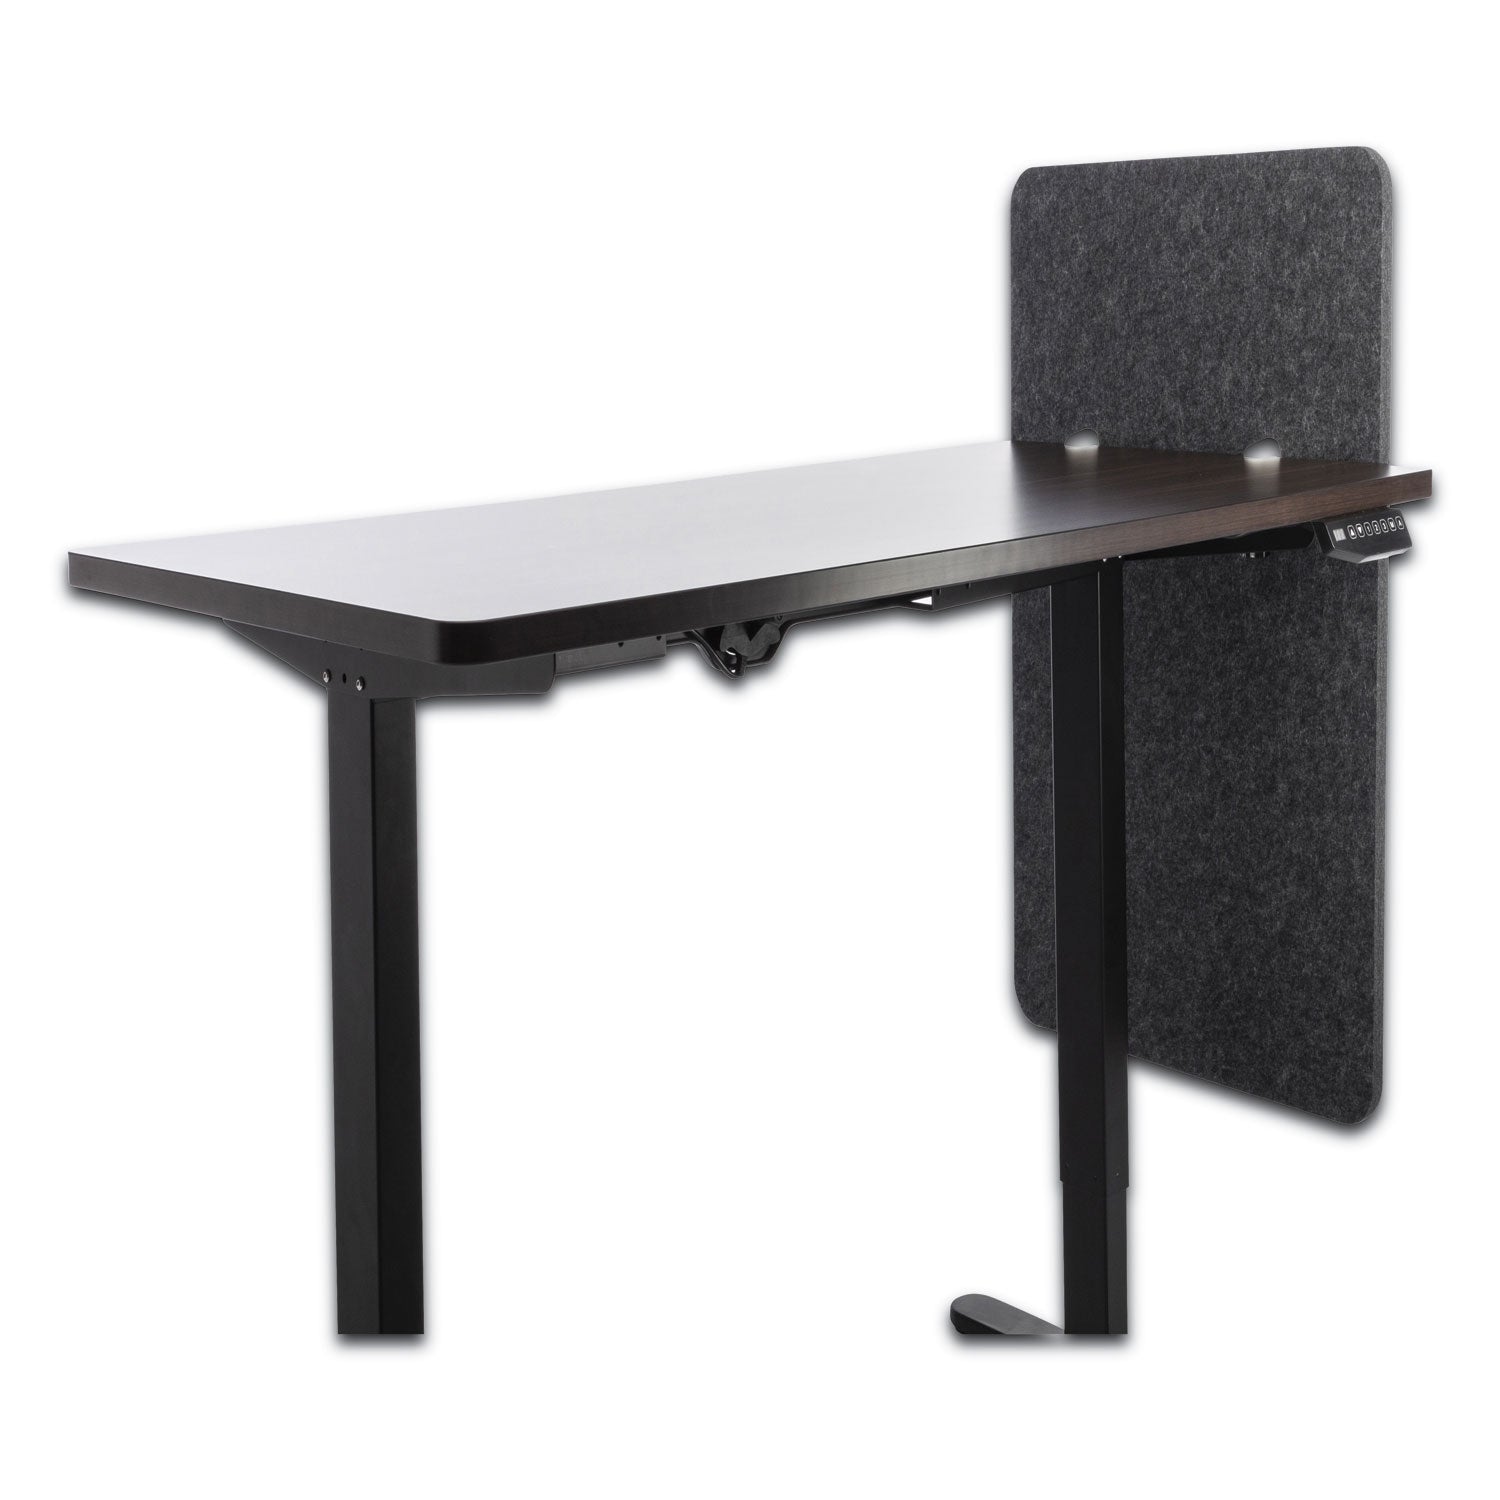 desk-modesty-adjustable-height-desk-screen-cubicle-divider-and-privacy-partition-235-x-1-x-36-polyester-ash_gn1ludm24361a - 2